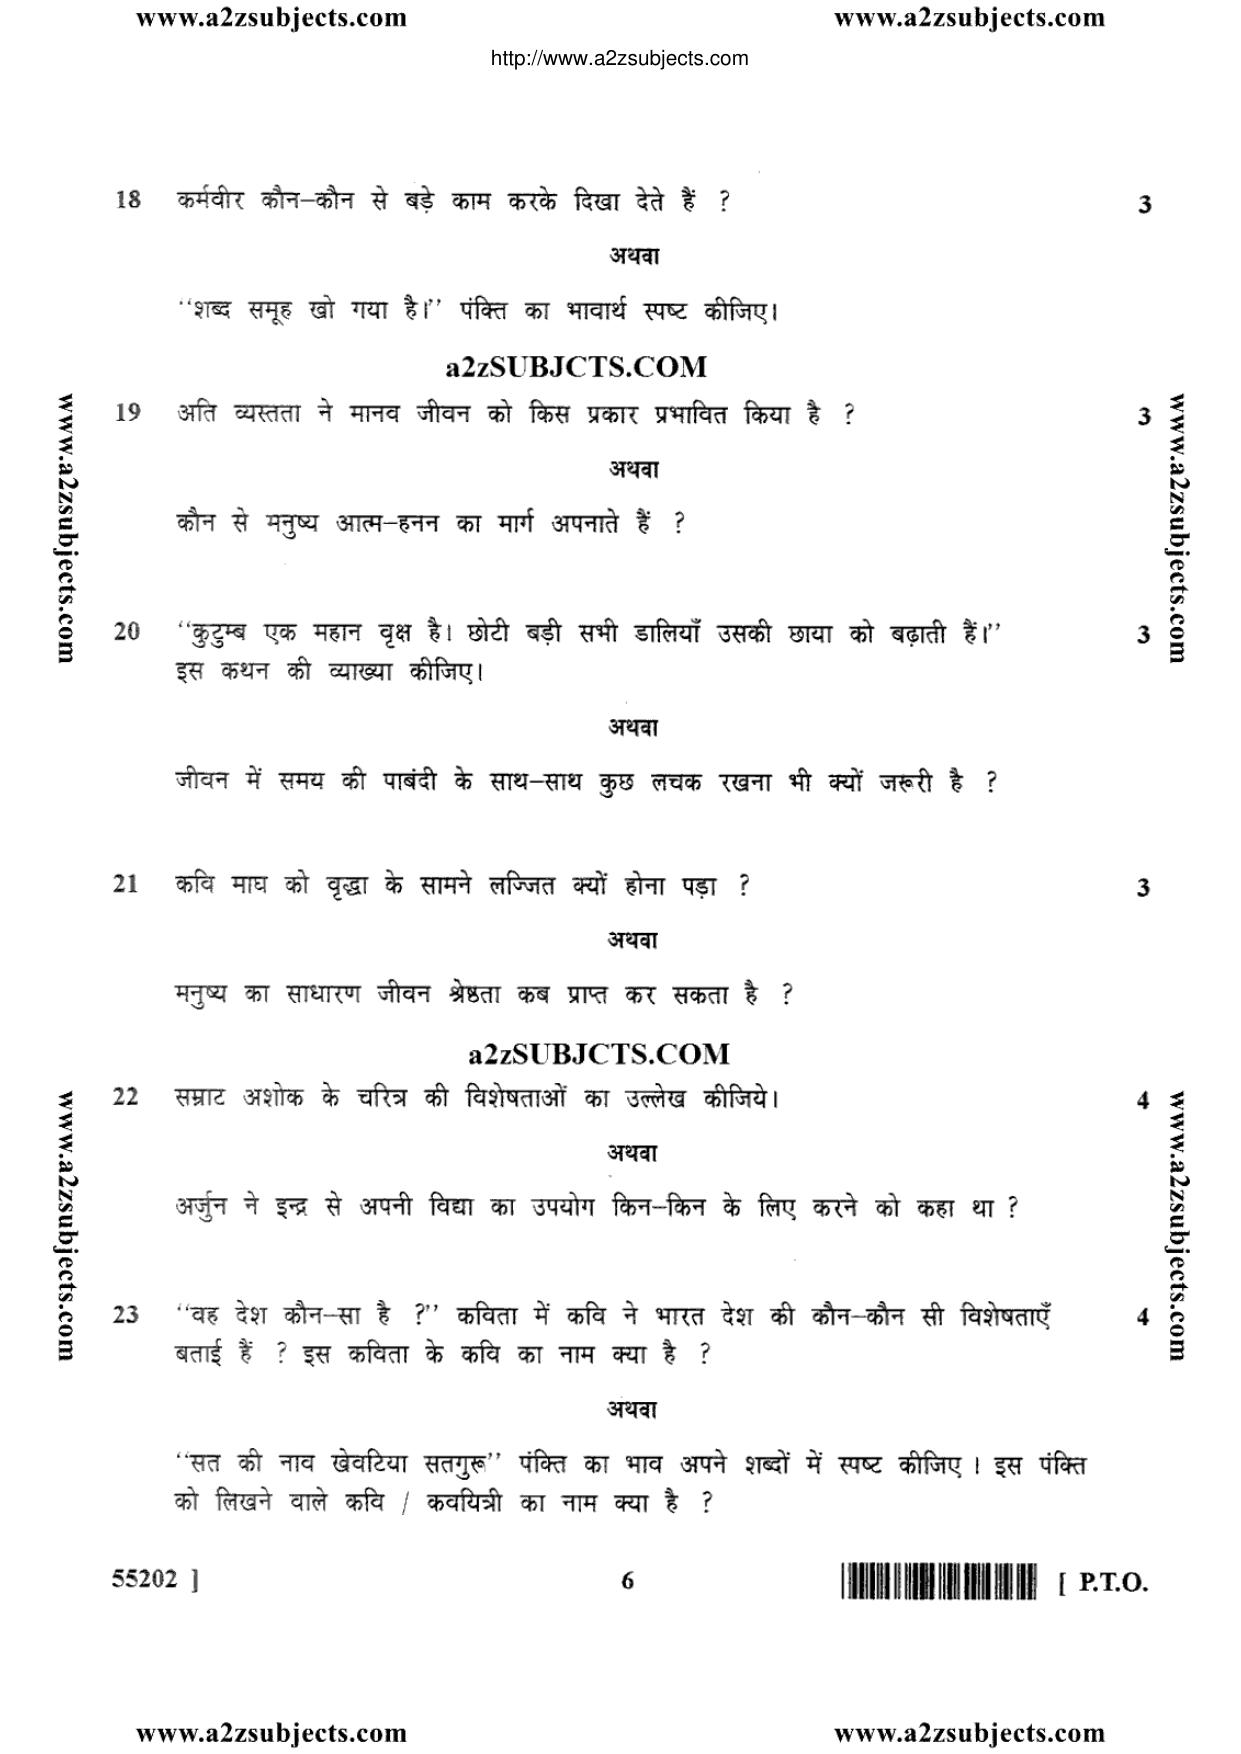 MP Board Class 10 Marathi 2017 Question Paper - Page 6